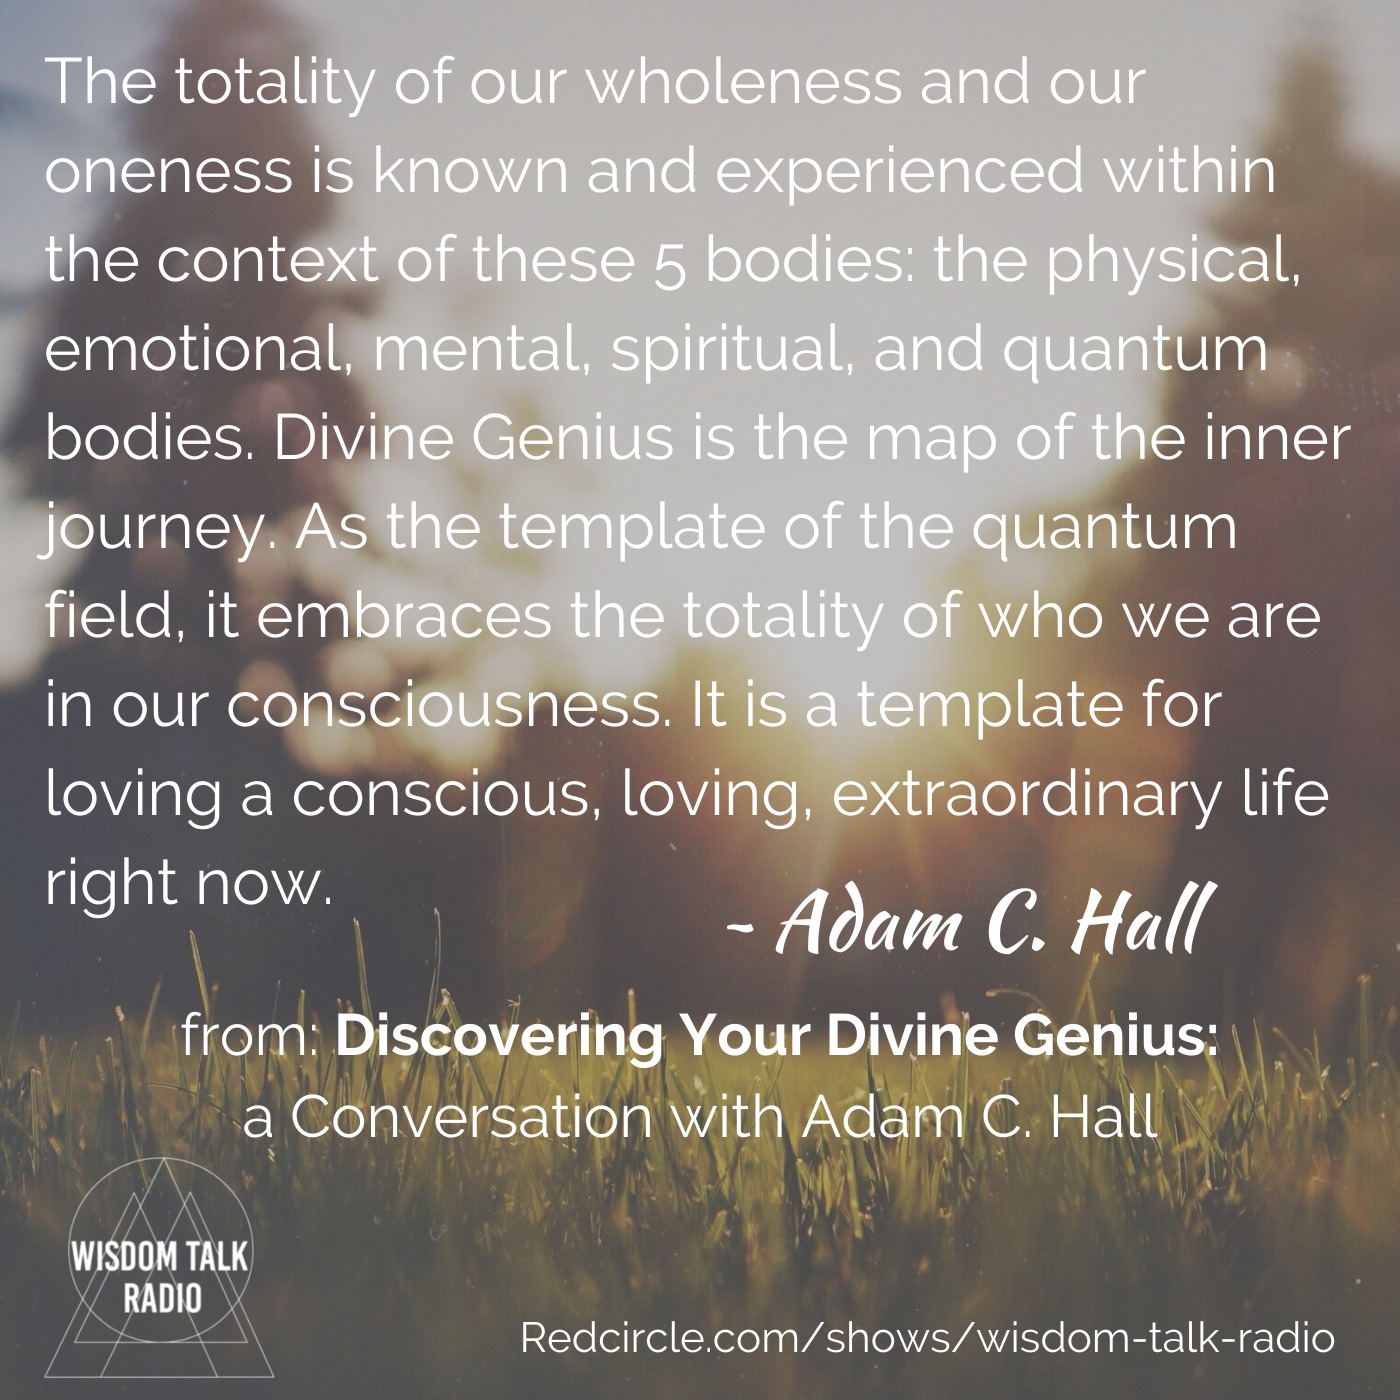 Discovering Your Divine Genius, a conversation with Adam C. Hall